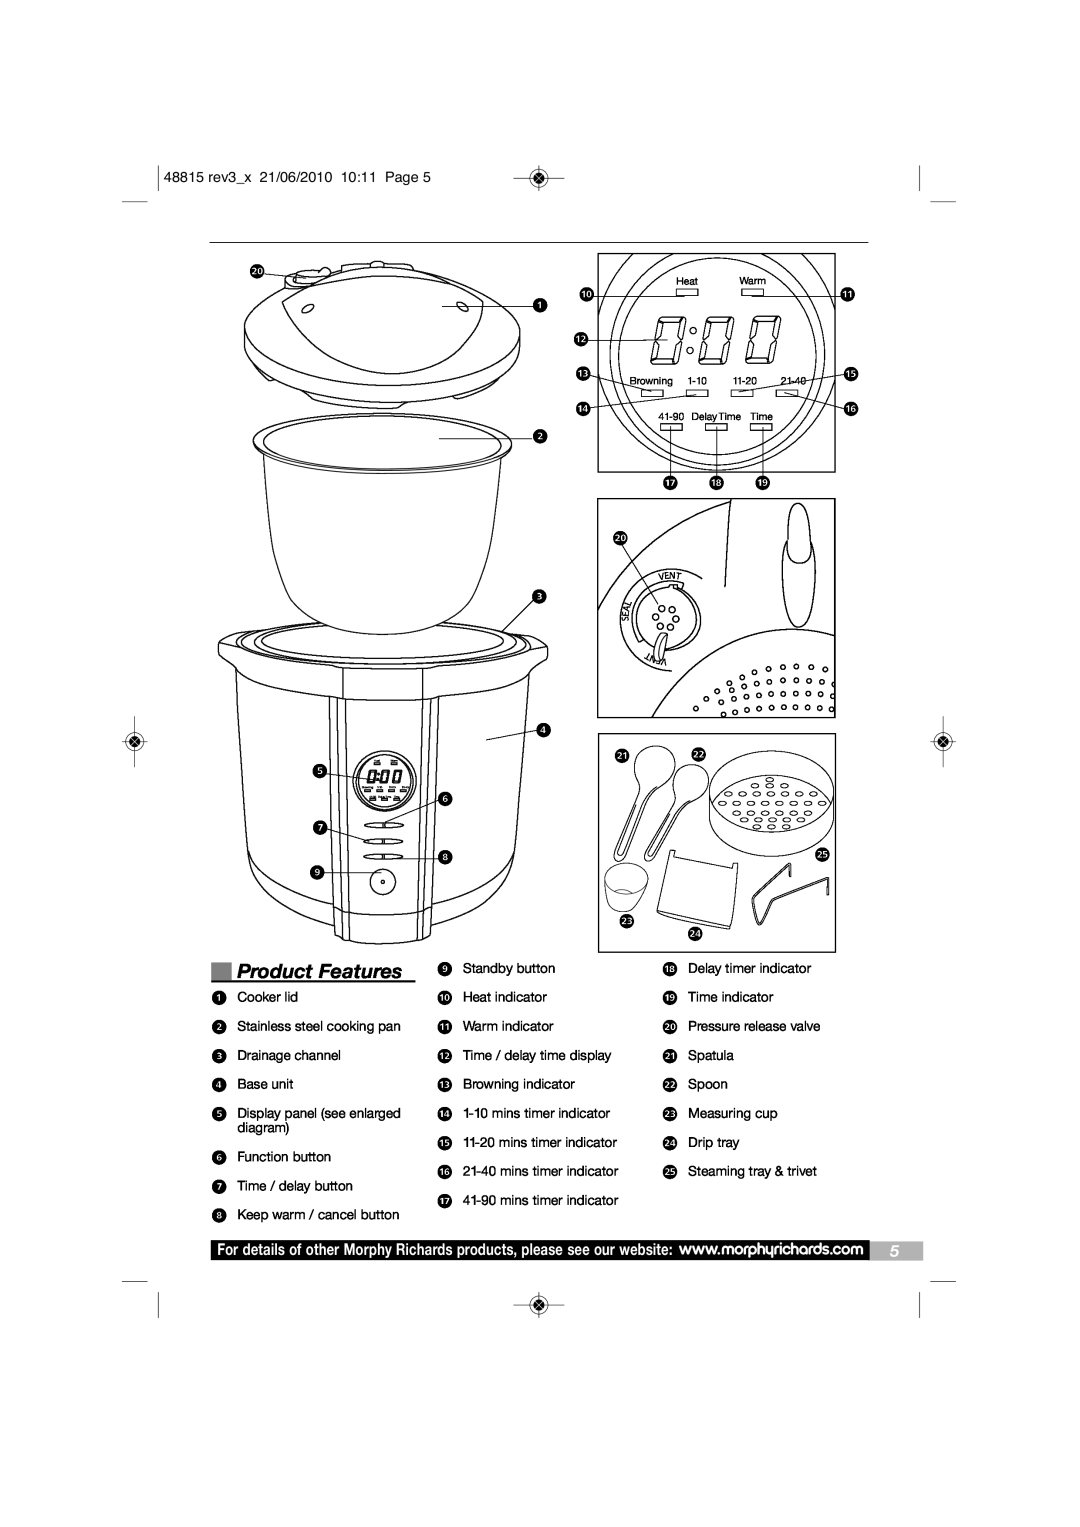 Morphy Richards MC48815 manual Product Features, For details of other Morphy Richards products, please see our website 